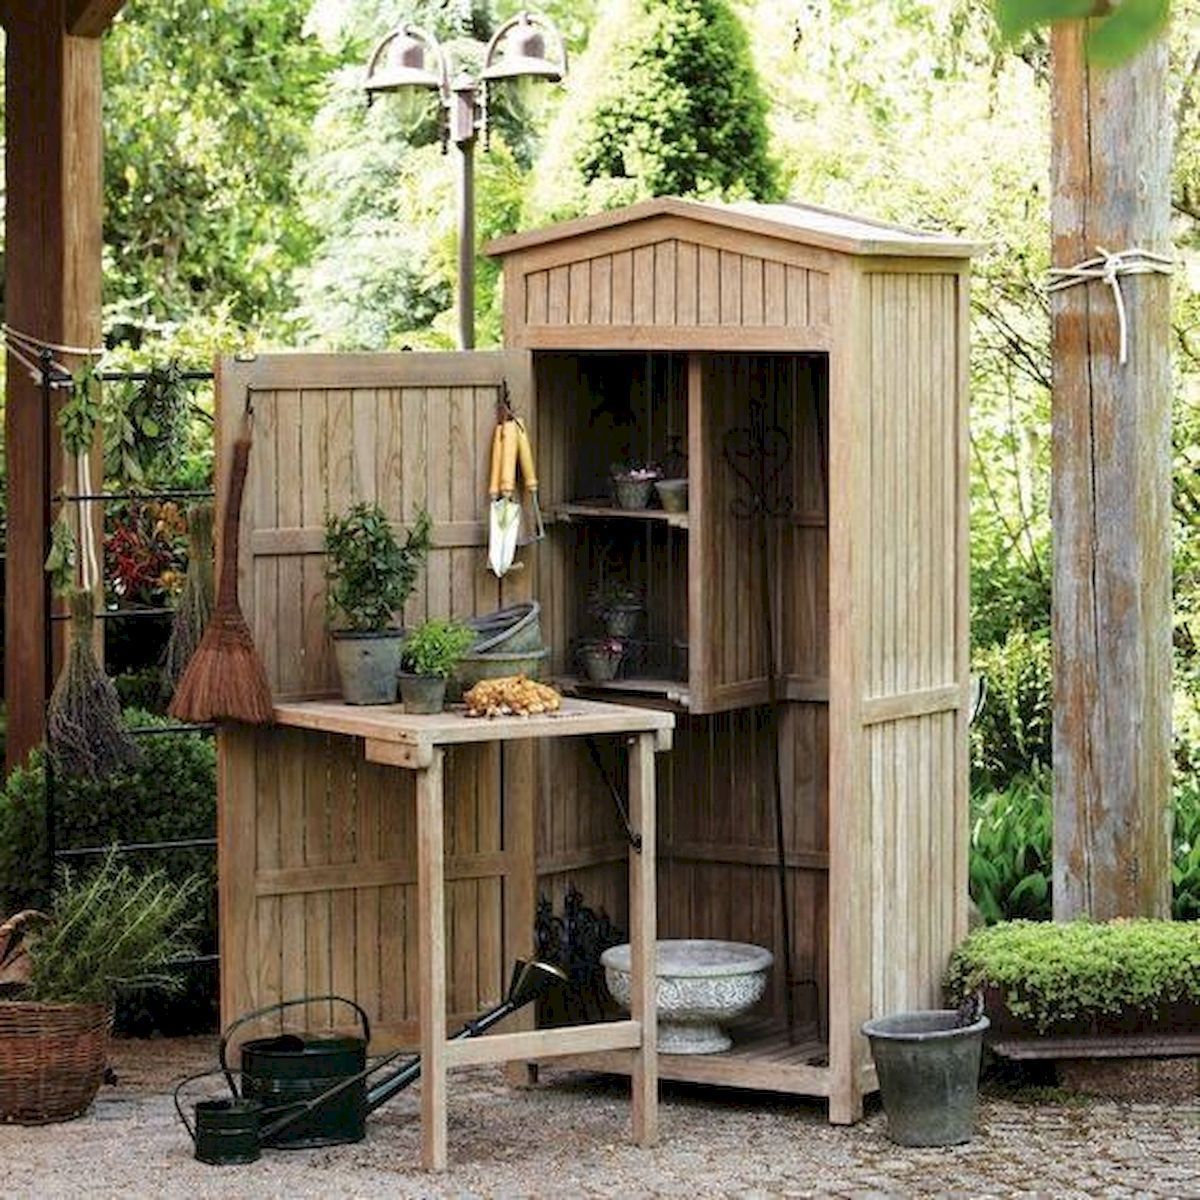 Wonderful Unique Small Storage Shed Ideas For Your Garden 29 - Wonderful Unique Small Storage Shed Ideas For Your Garden 29 -   10 diy Garden shed ideas